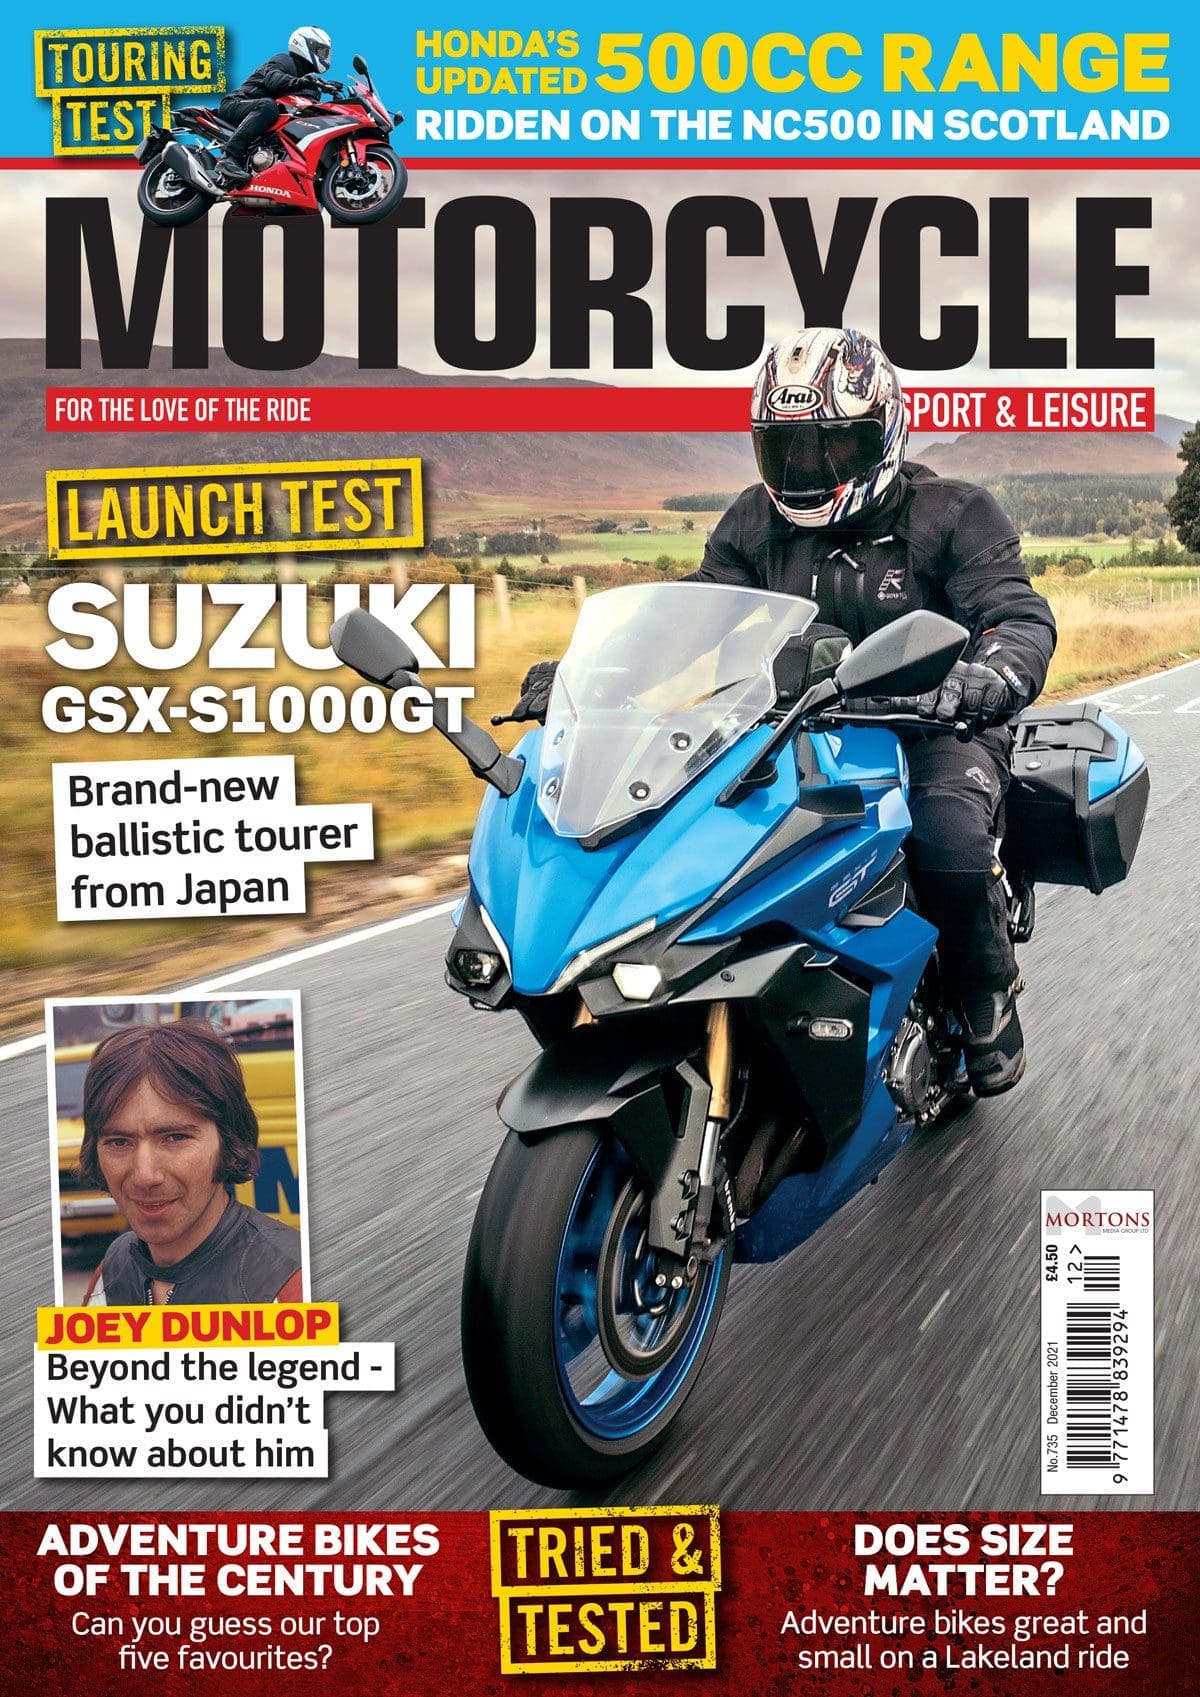 PREVIEW: December issue of Motorcycle Sport & Leisure magazine